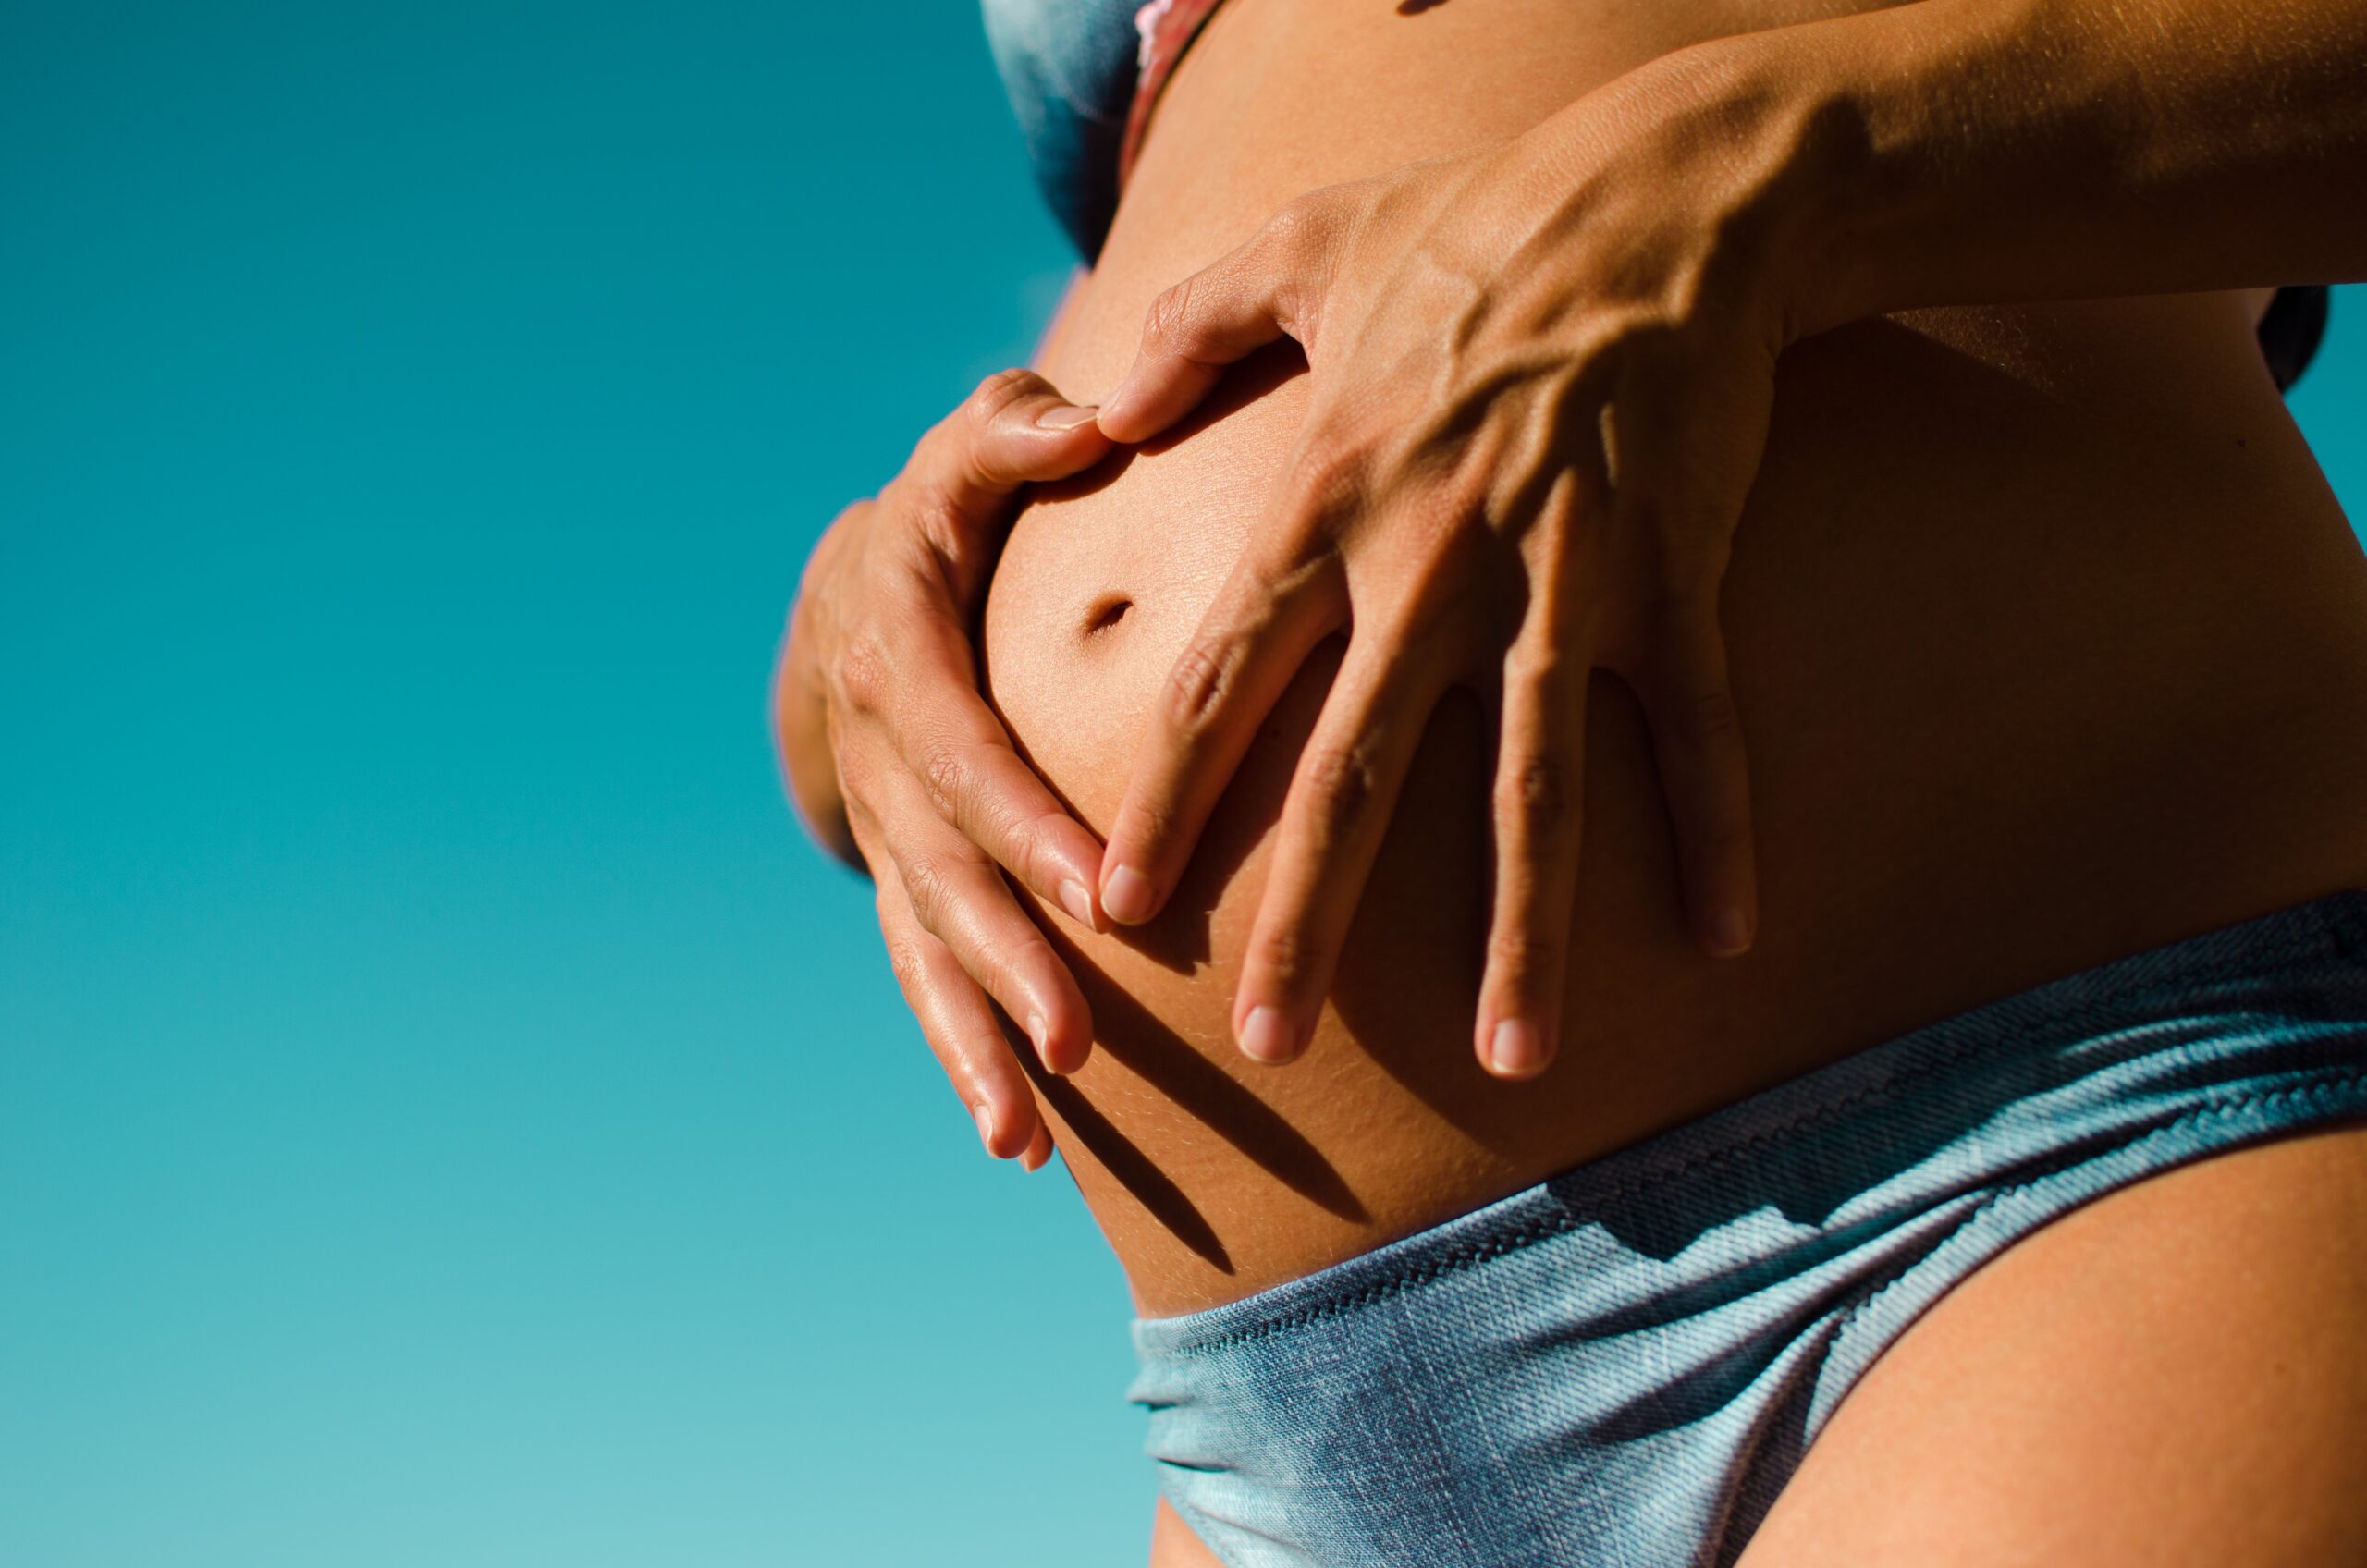 Adenomyosis: What Is, Causes, Symptoms, Diagnosis, and Risk Factors